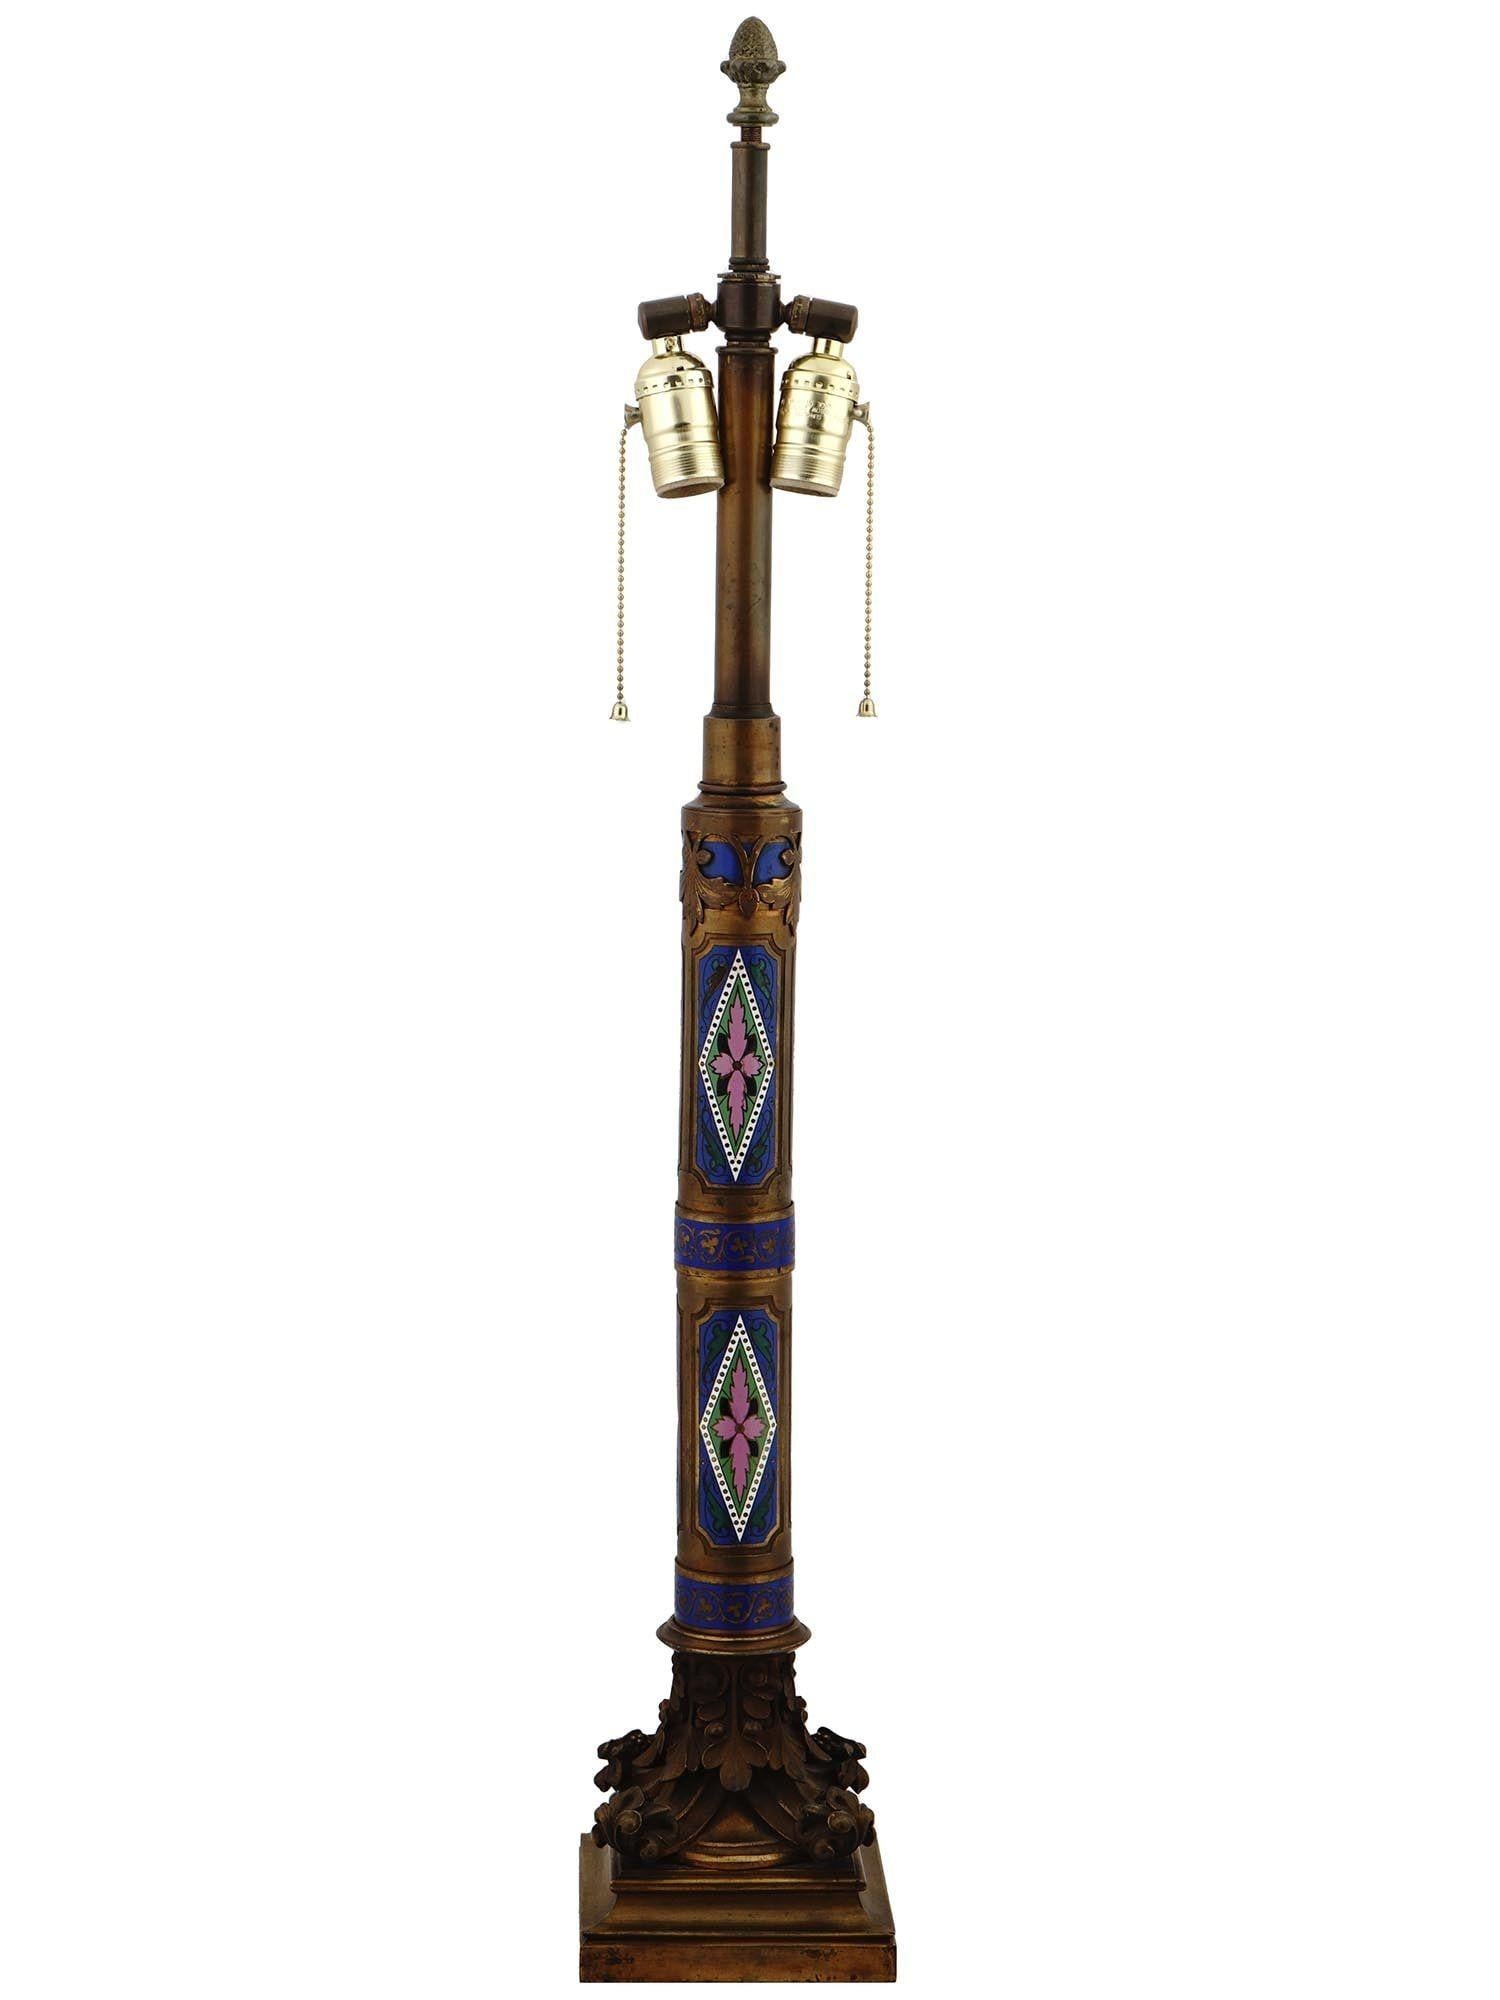 Antique Champleve Enameled Bronze Table Lamp Attributed to Caldwell  For Sale 2